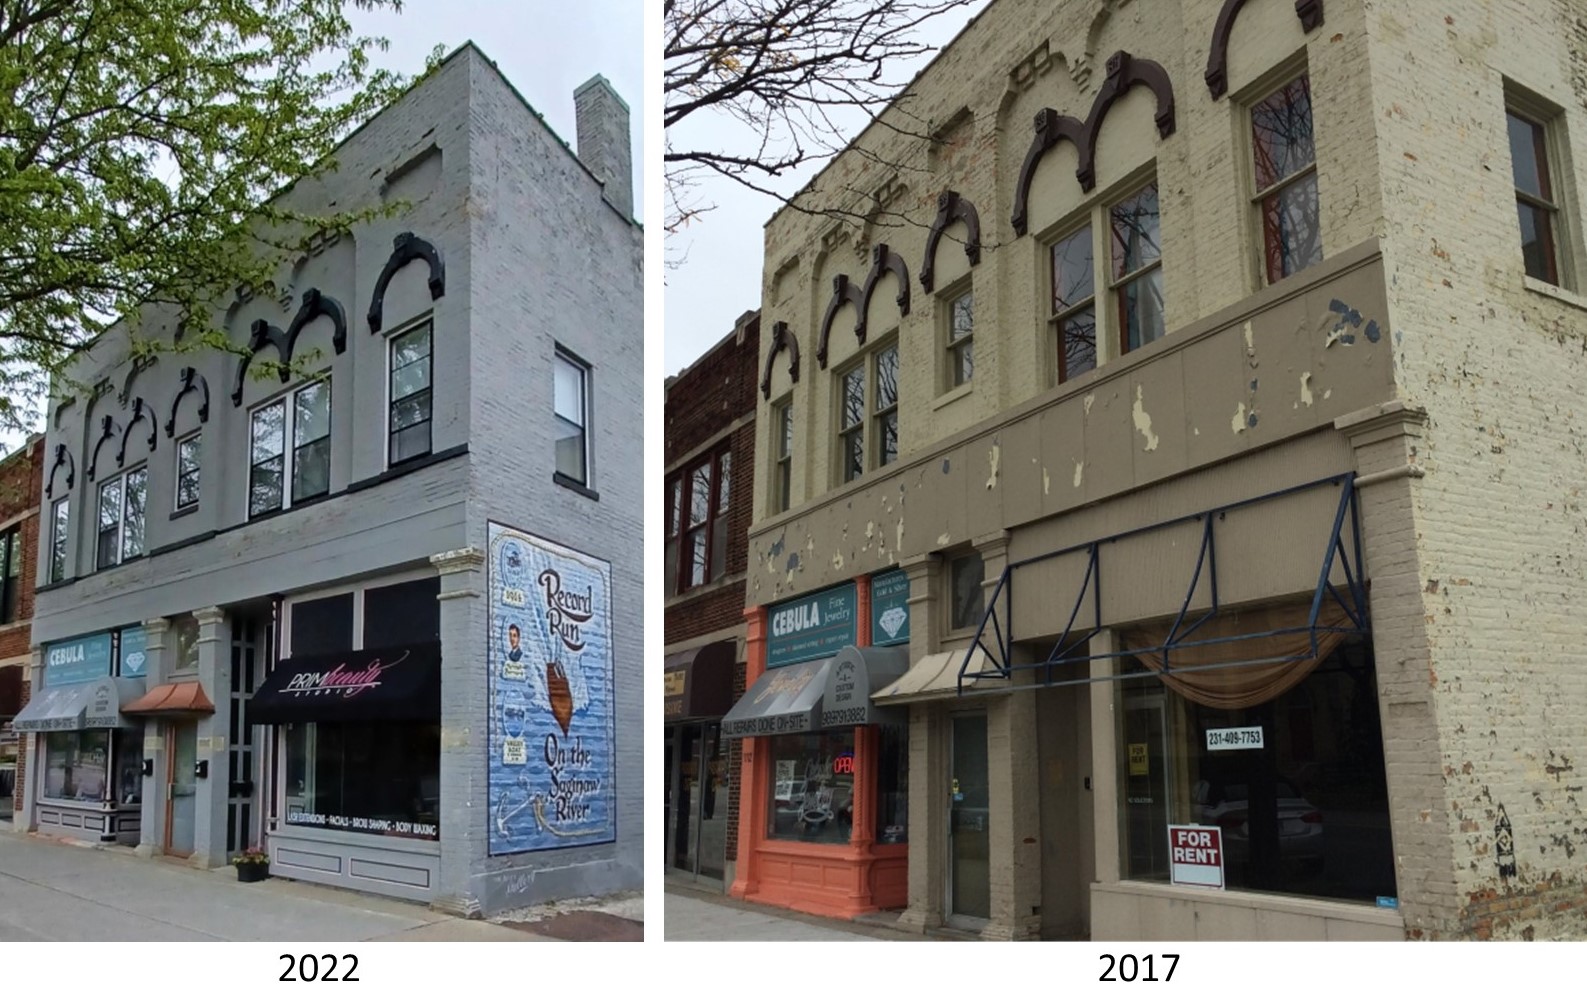 110-112 N. Michigan Exterior Before and After